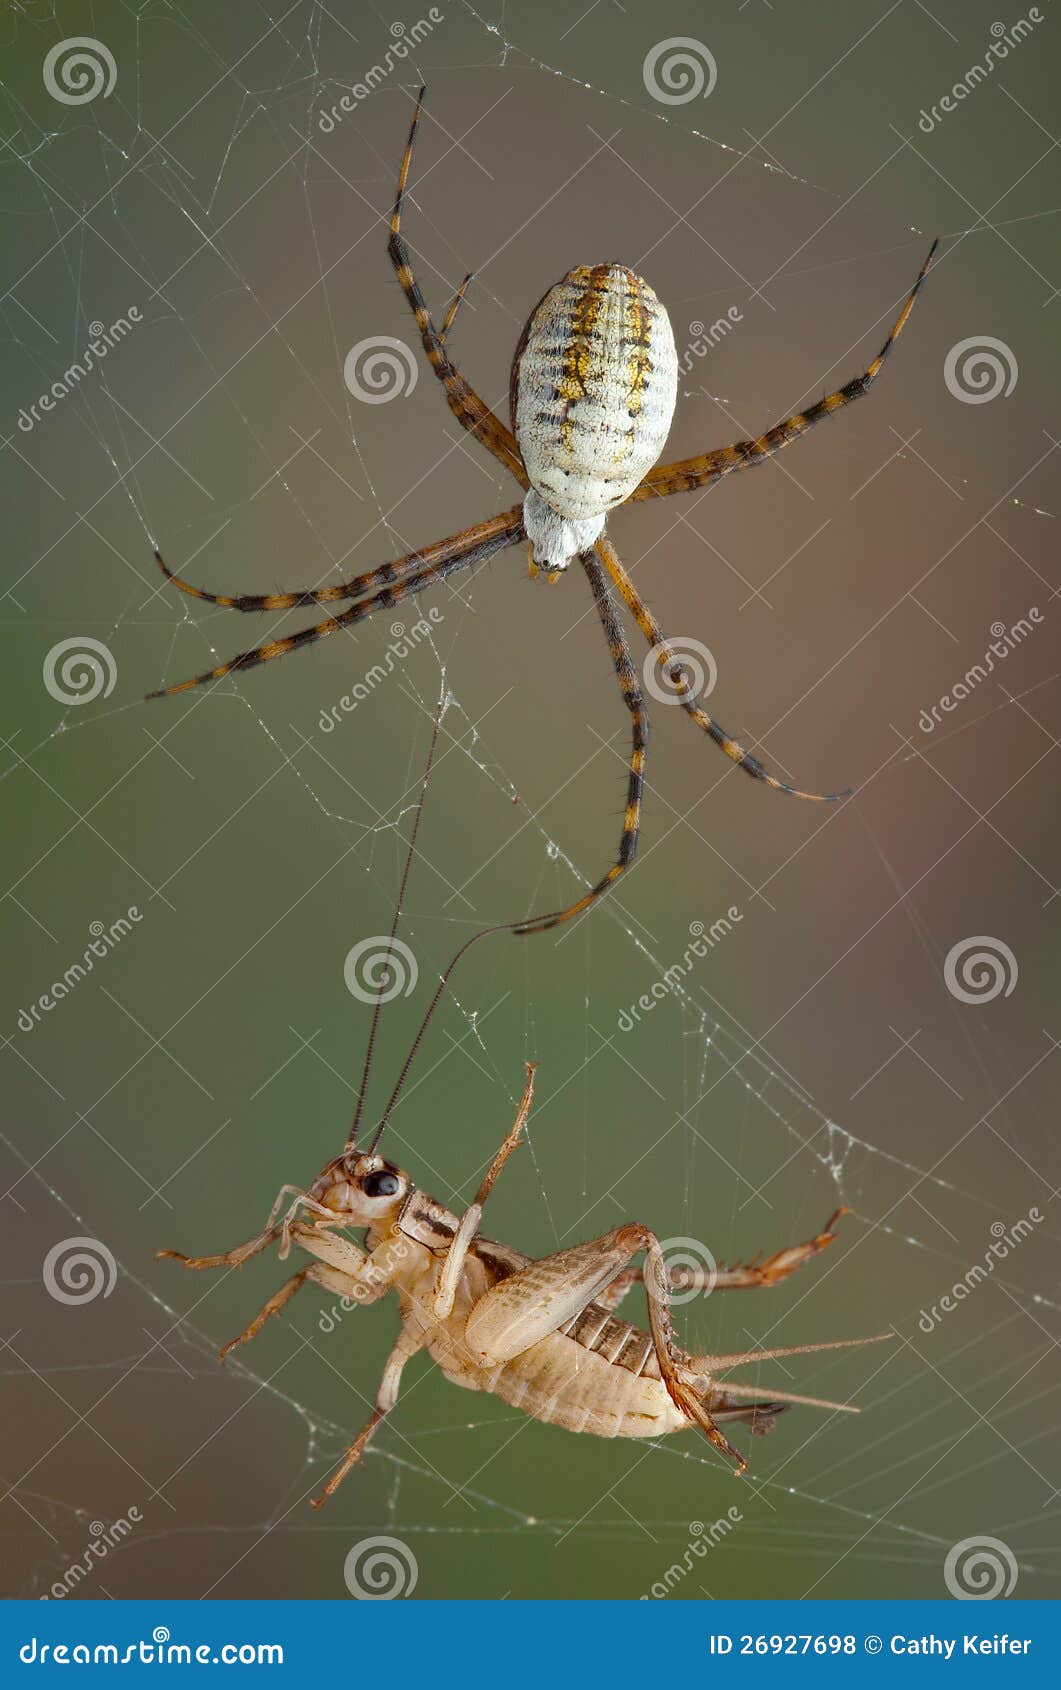 Spider and cricket in web stock photo